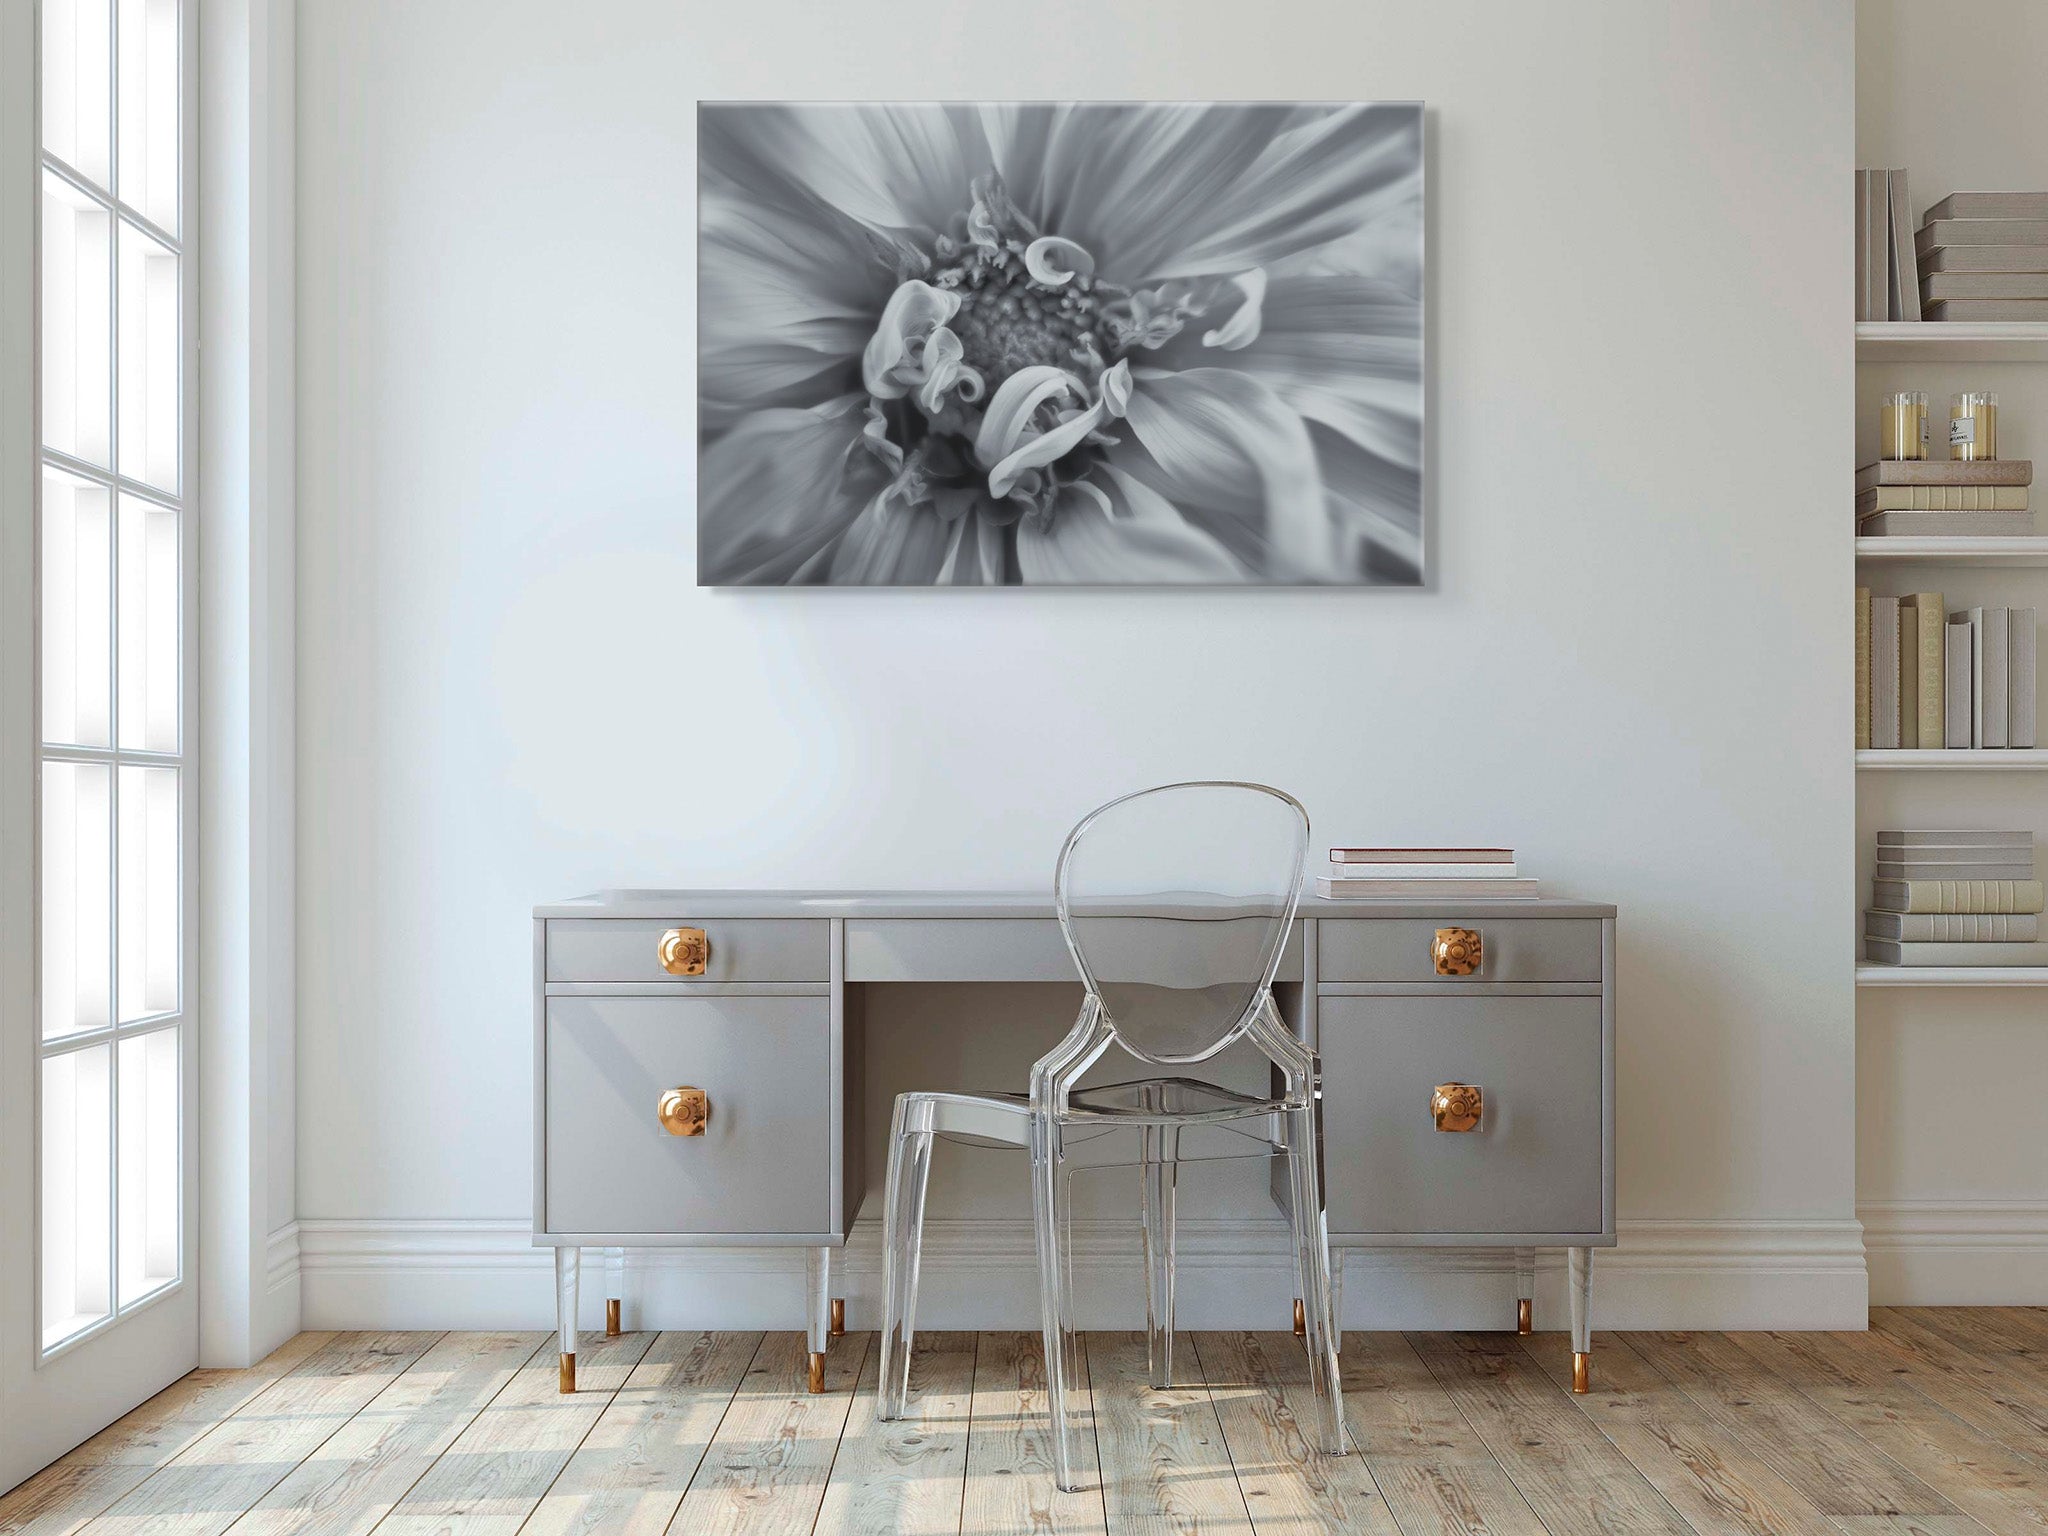 Picture hanging on the wall of an office over a desk. The picture is a black and white flower photograph of a dahlia flower titled "A Dash of Elegance" by Cameron Dreaux of Dreaux Fine Art.